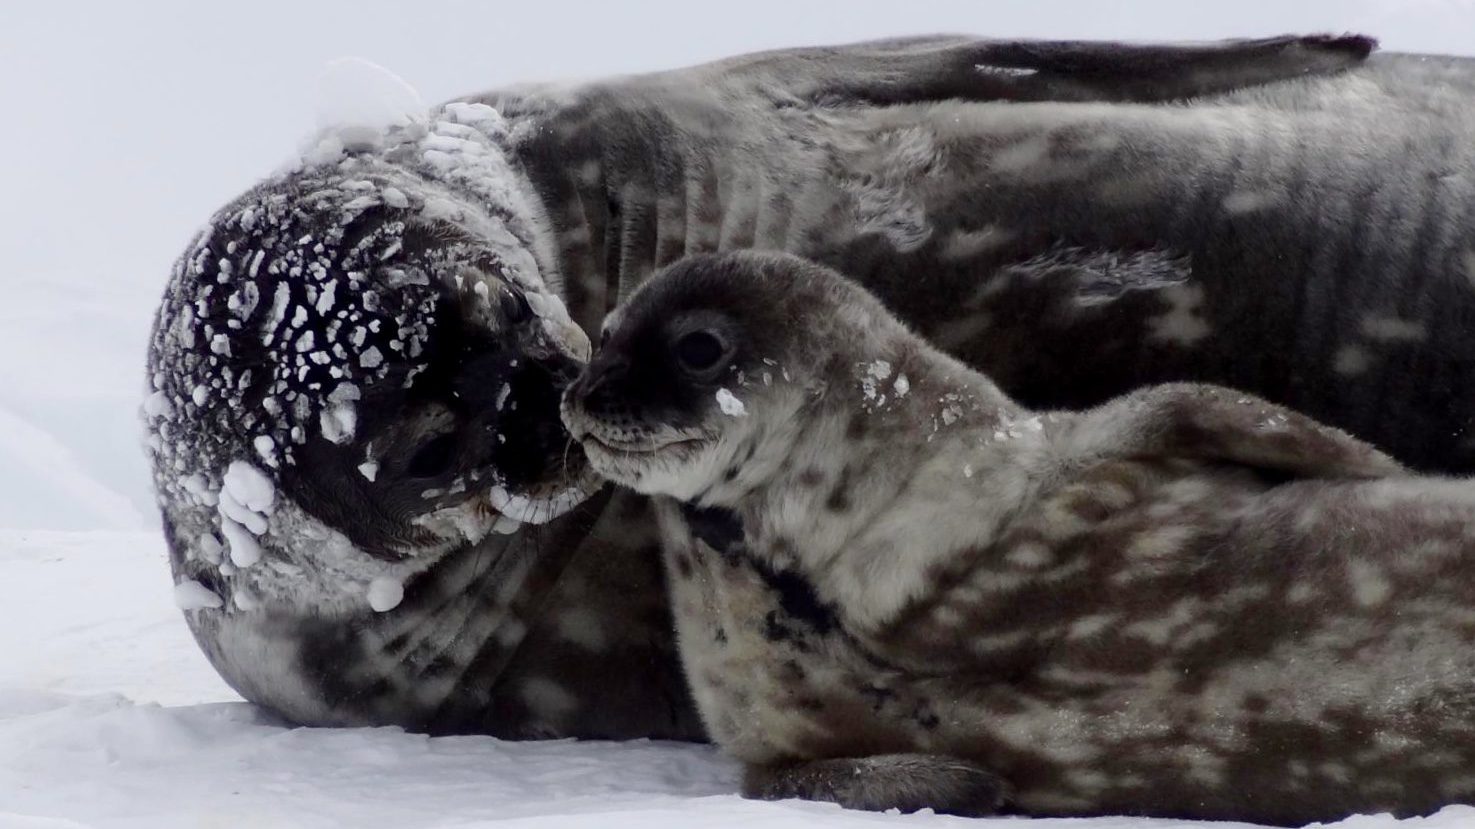 A female Weddell seal lays on the ice with her pup in Antarctica. A new WHOI-led study shows that during lactation, female Weddell seals provide so much iron to their pups that the mothers then need to dramatically limit their own diving and underwater foraging capabilities. (All images were taken under permit NMFS 17411-03) Image credit: Michelle Shero/ © Woods Hole Oceanographic Institution